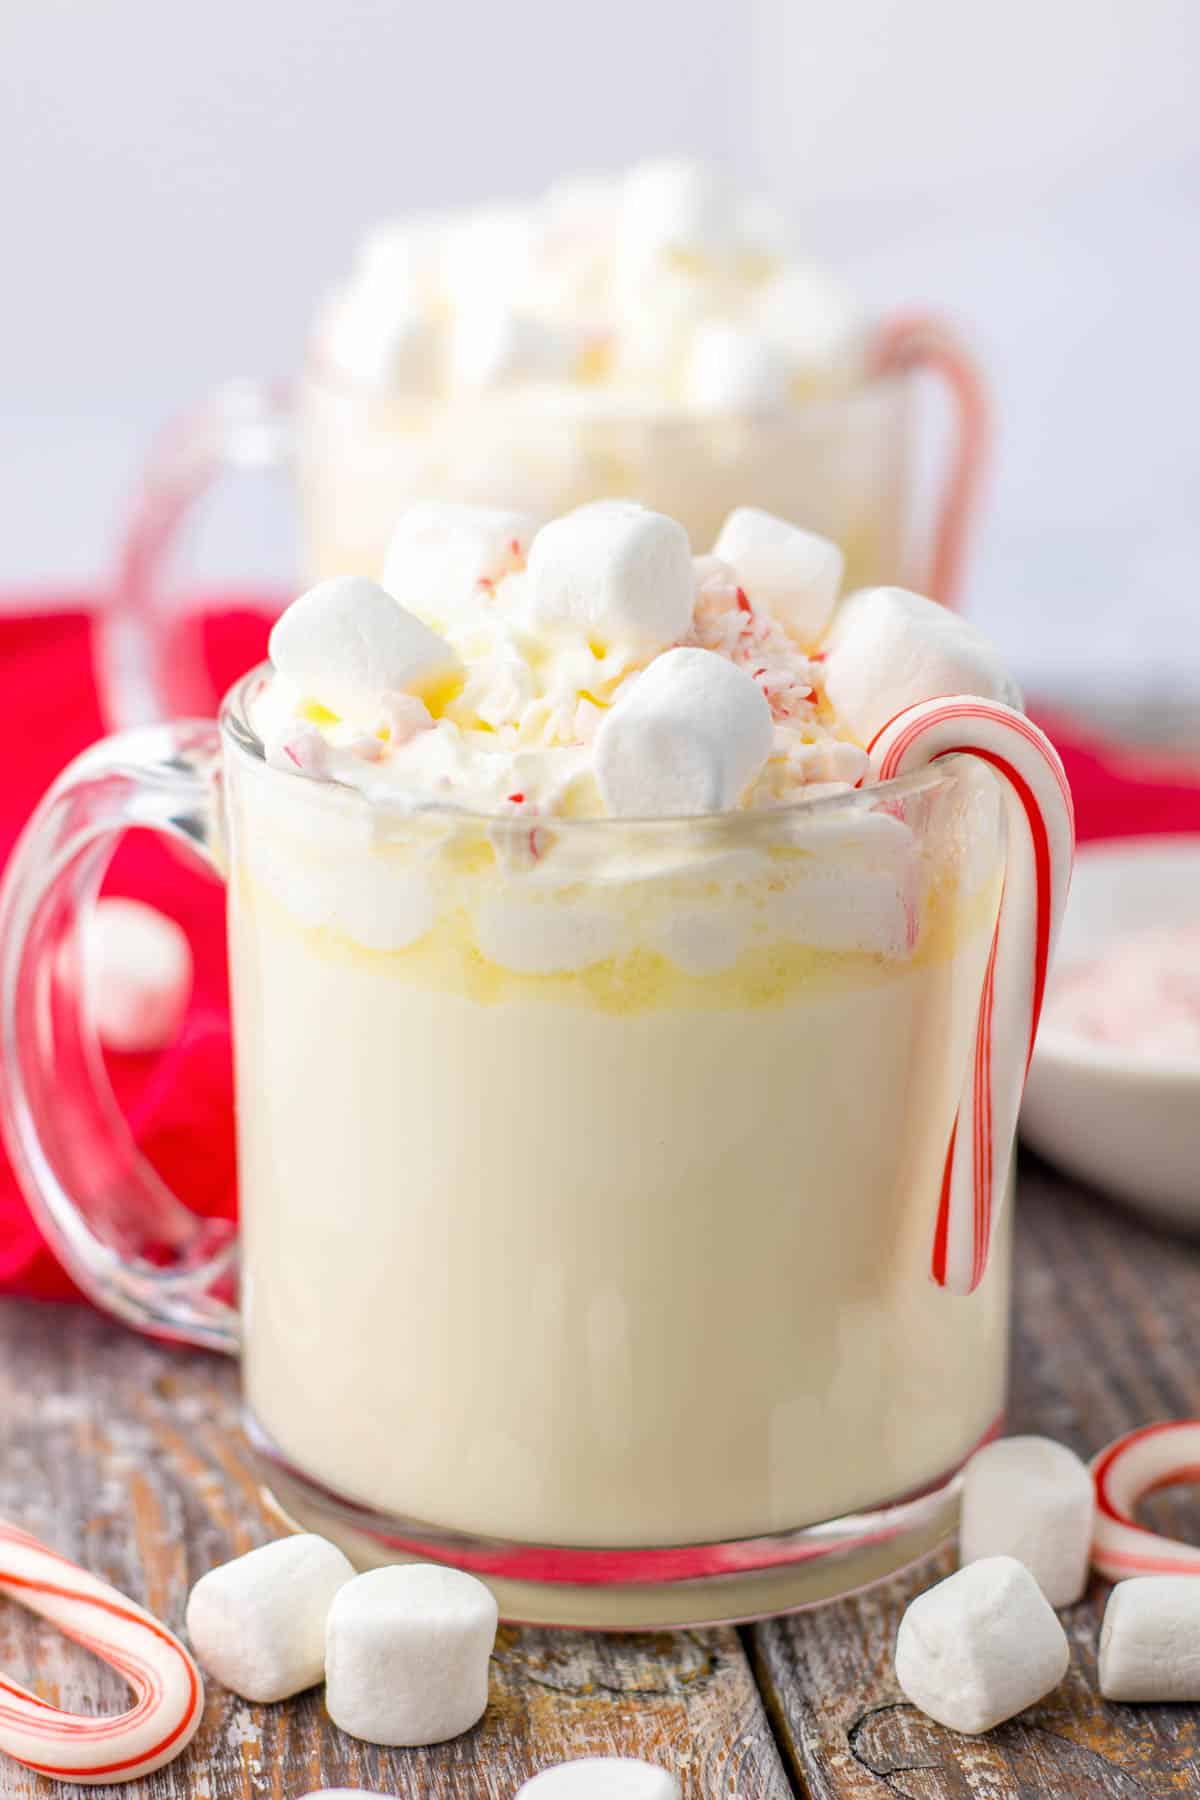 Two cups of hot chocolate with marshmallows and candy canes.